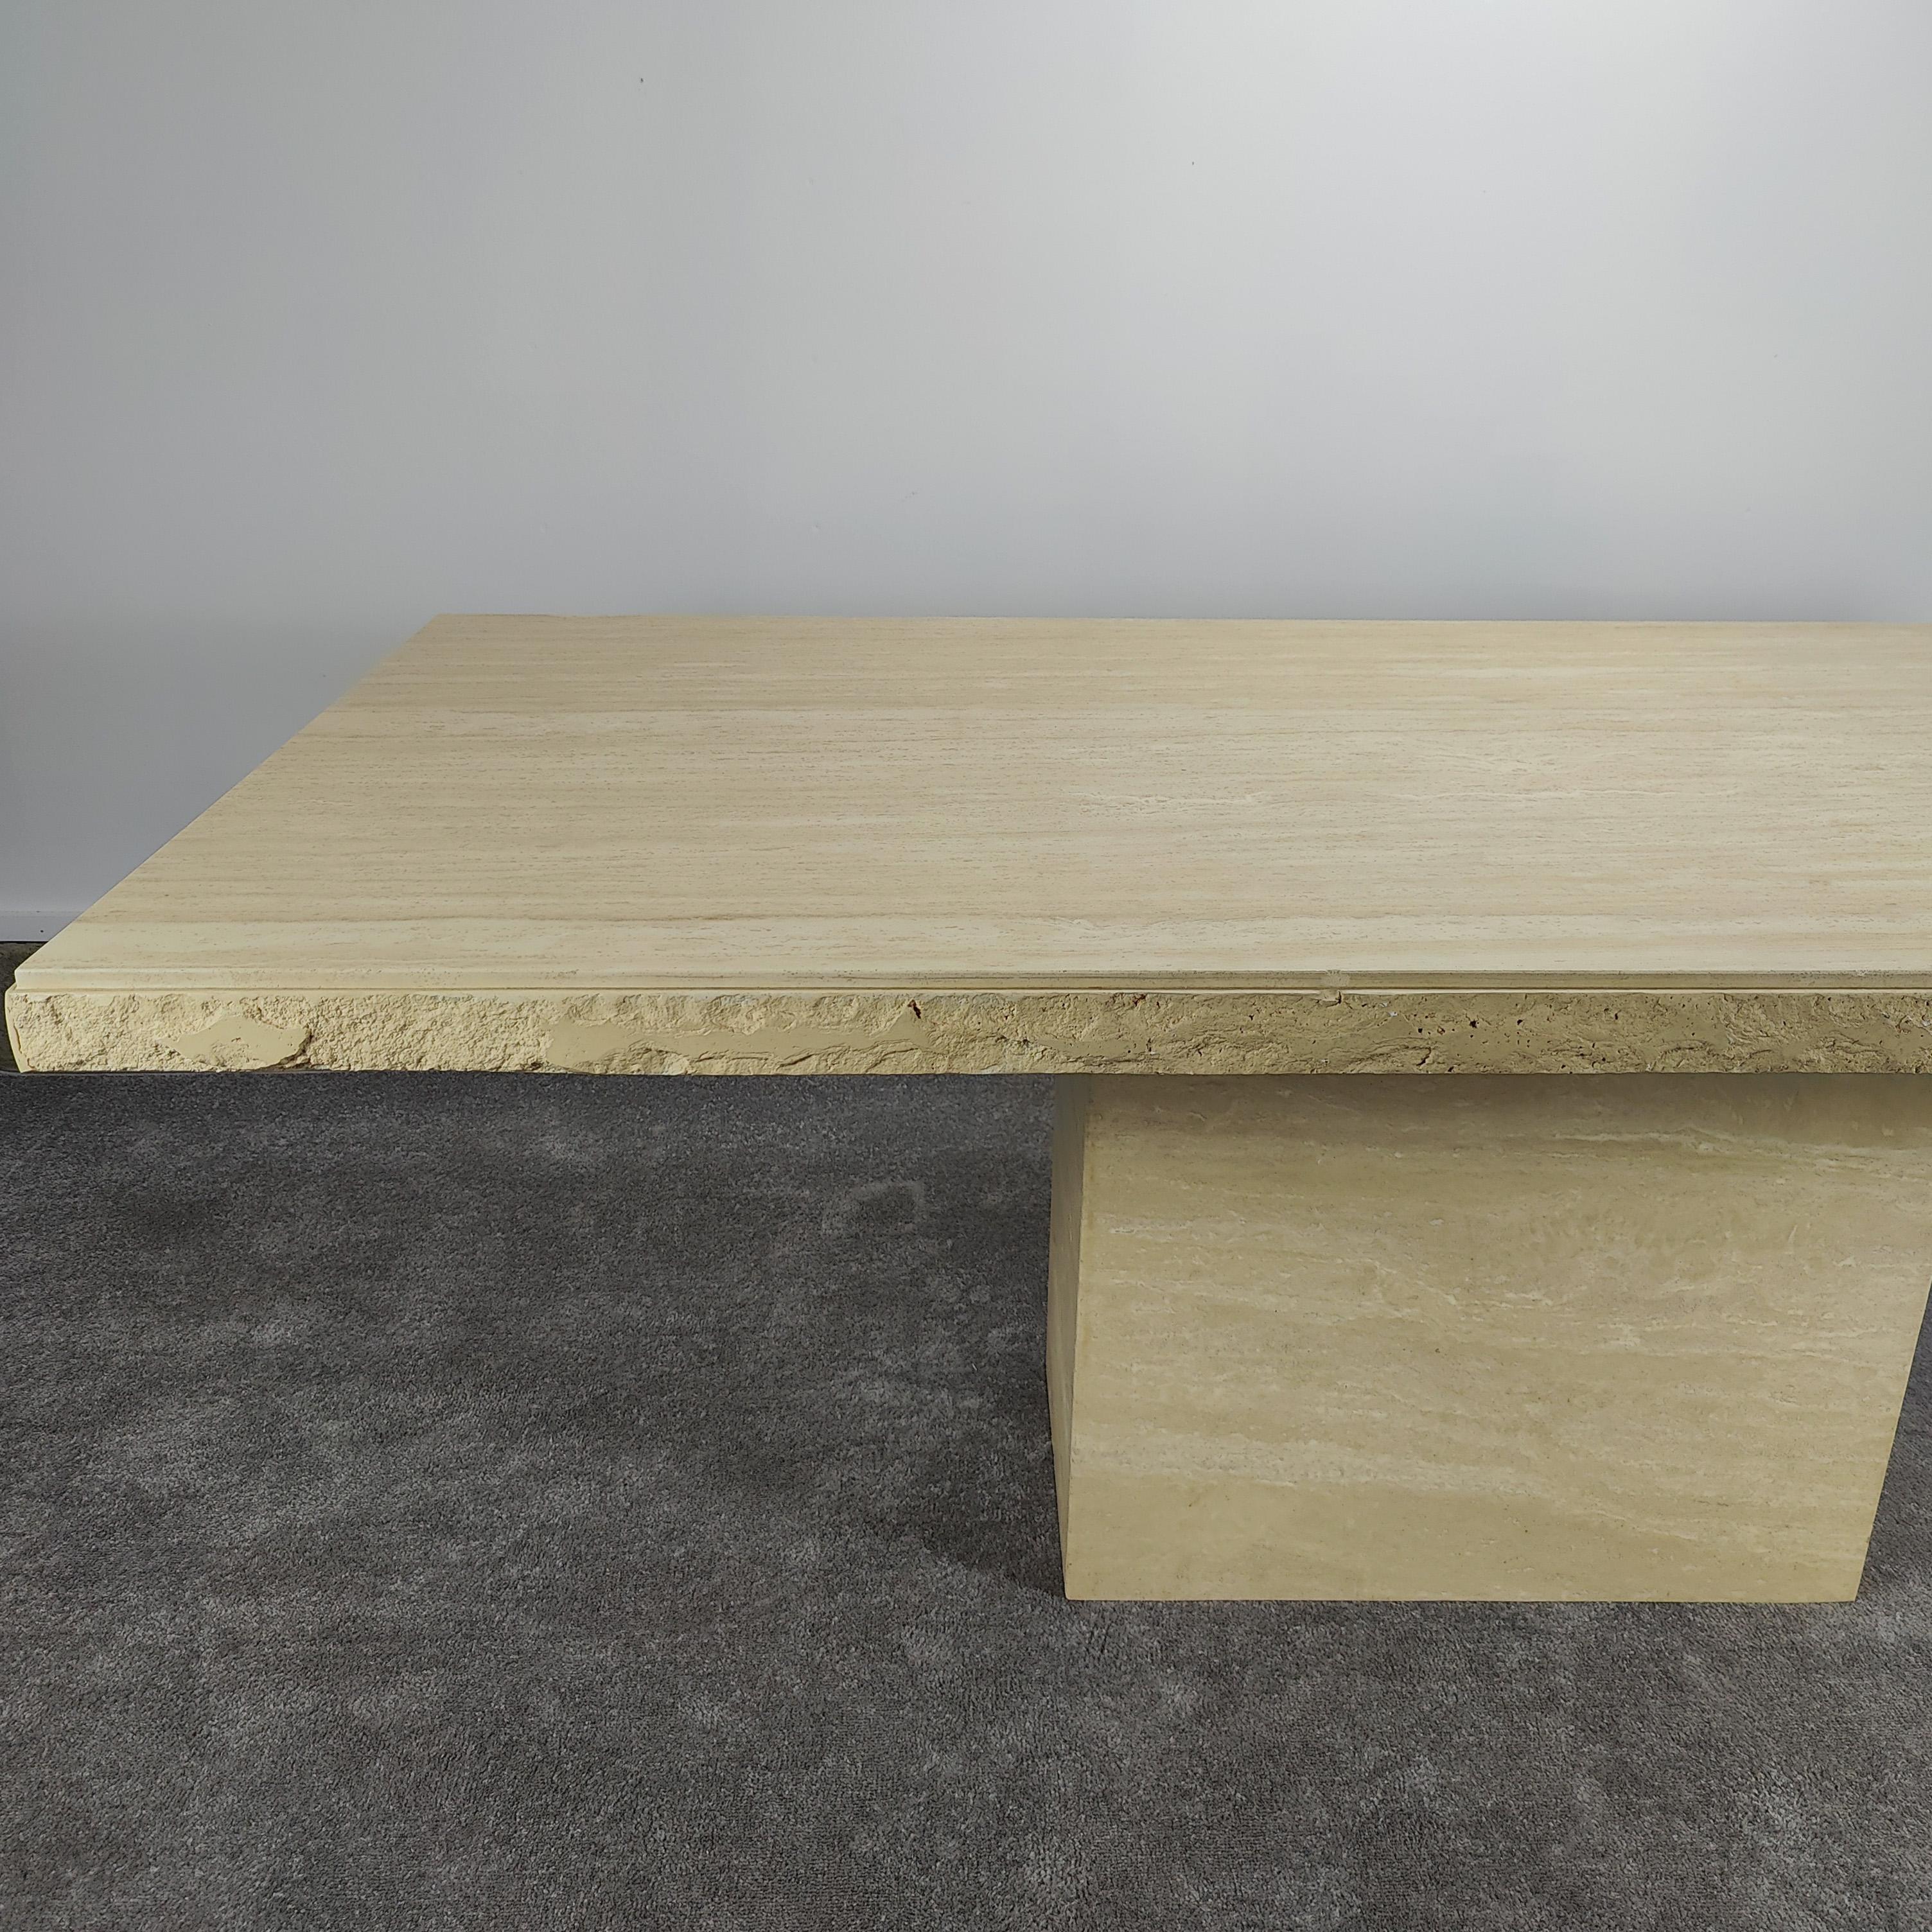 Now available, a monumental Italian travertine stone dining table, circa the 1980s. This piece showcases a rectangular pedestal base and a large thick rectangular tabletop. A beautiful 'live edge' and subtle veins add to the details of this gorgeous